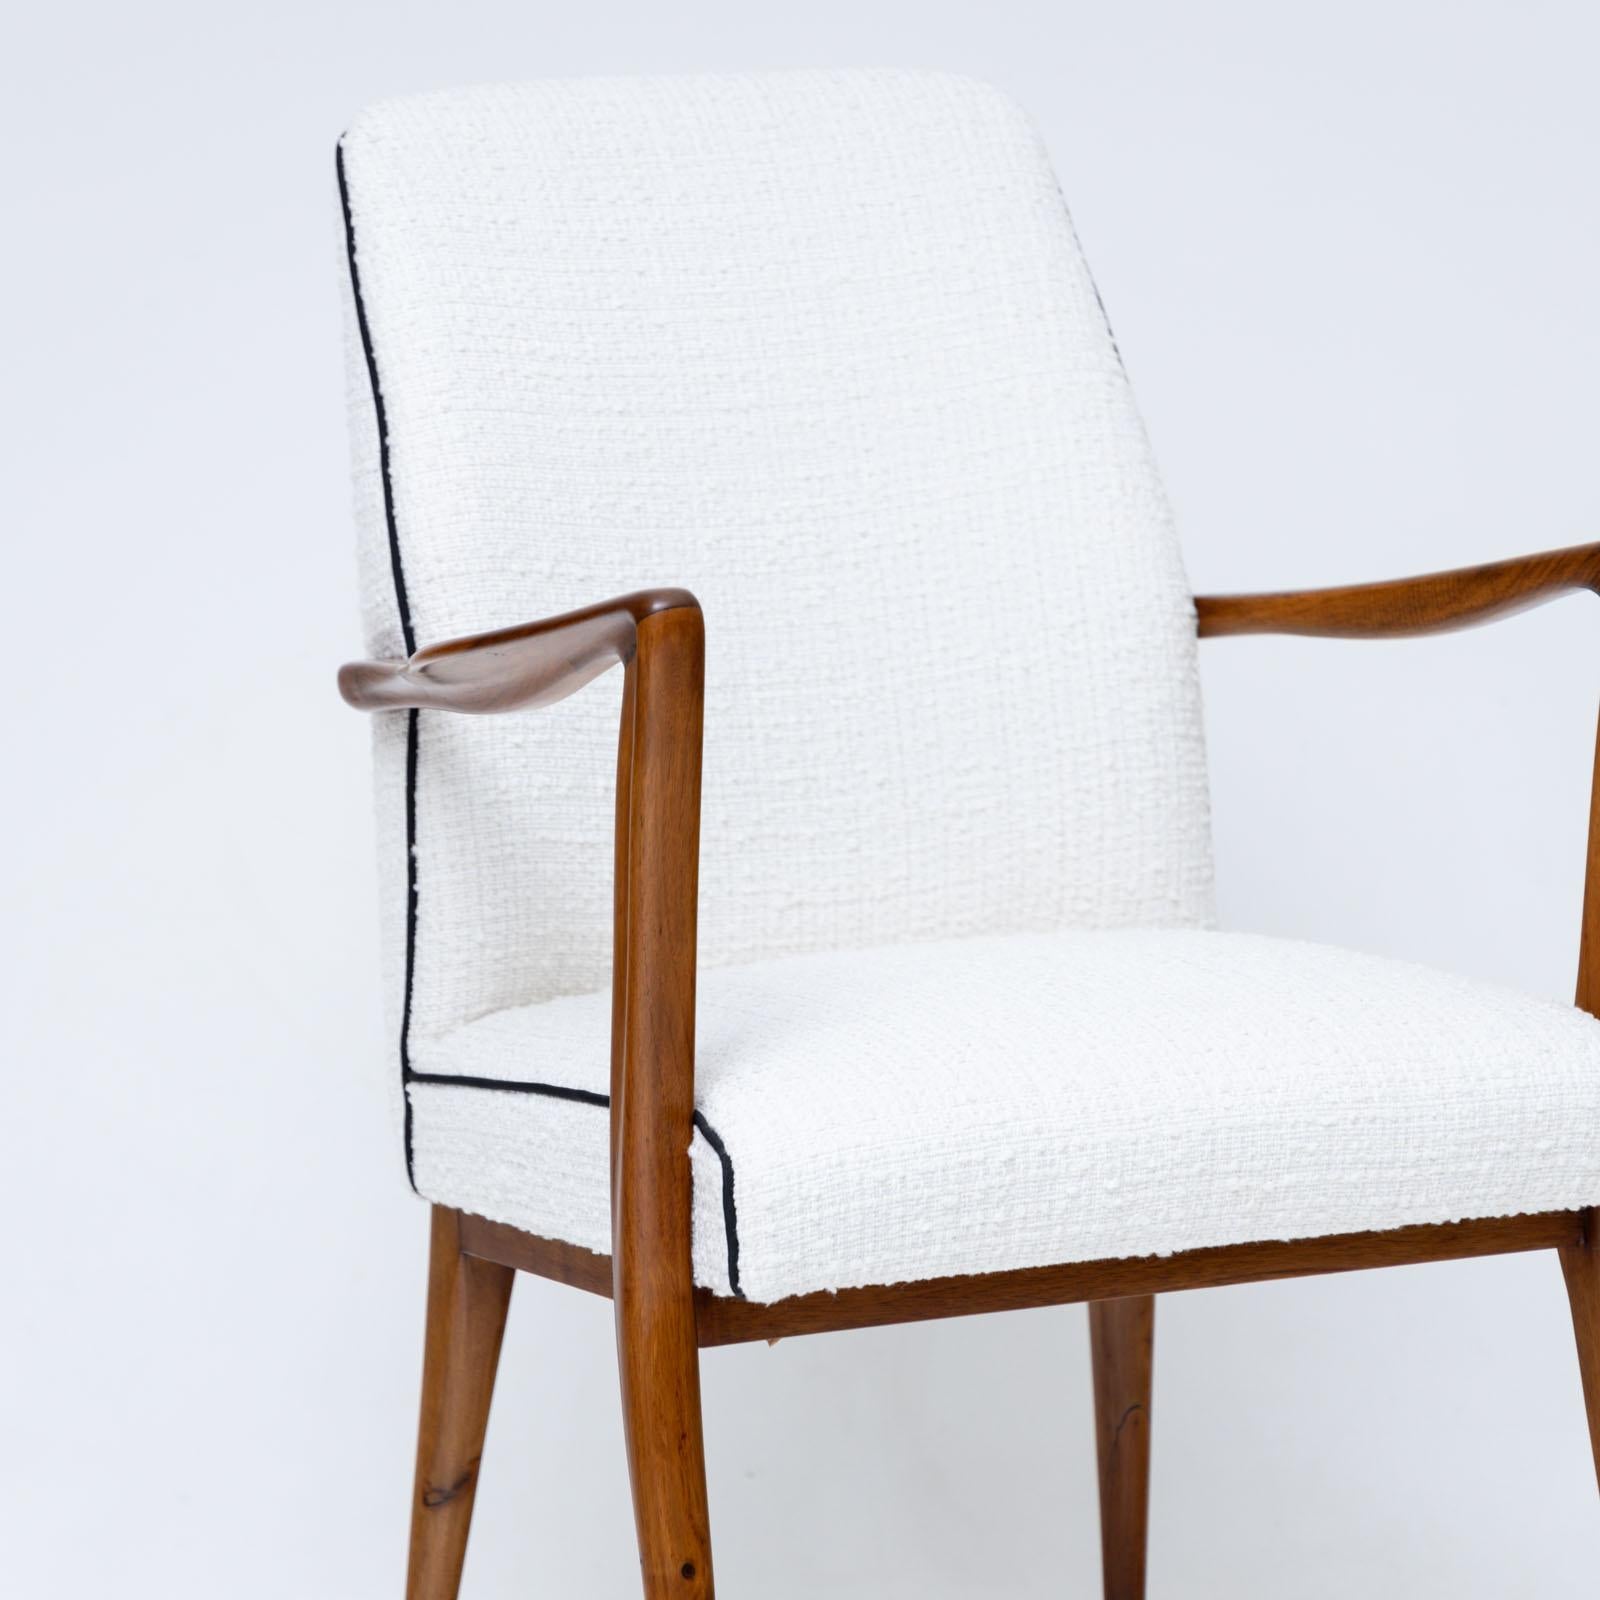 Set of six dining chairs featuring brass feet and sleek wooden frames with a polished finish. These chairs have undergone professional refurbishment and reupholstery. The high-quality white bouclé fabric is complemented by black piping, adding a